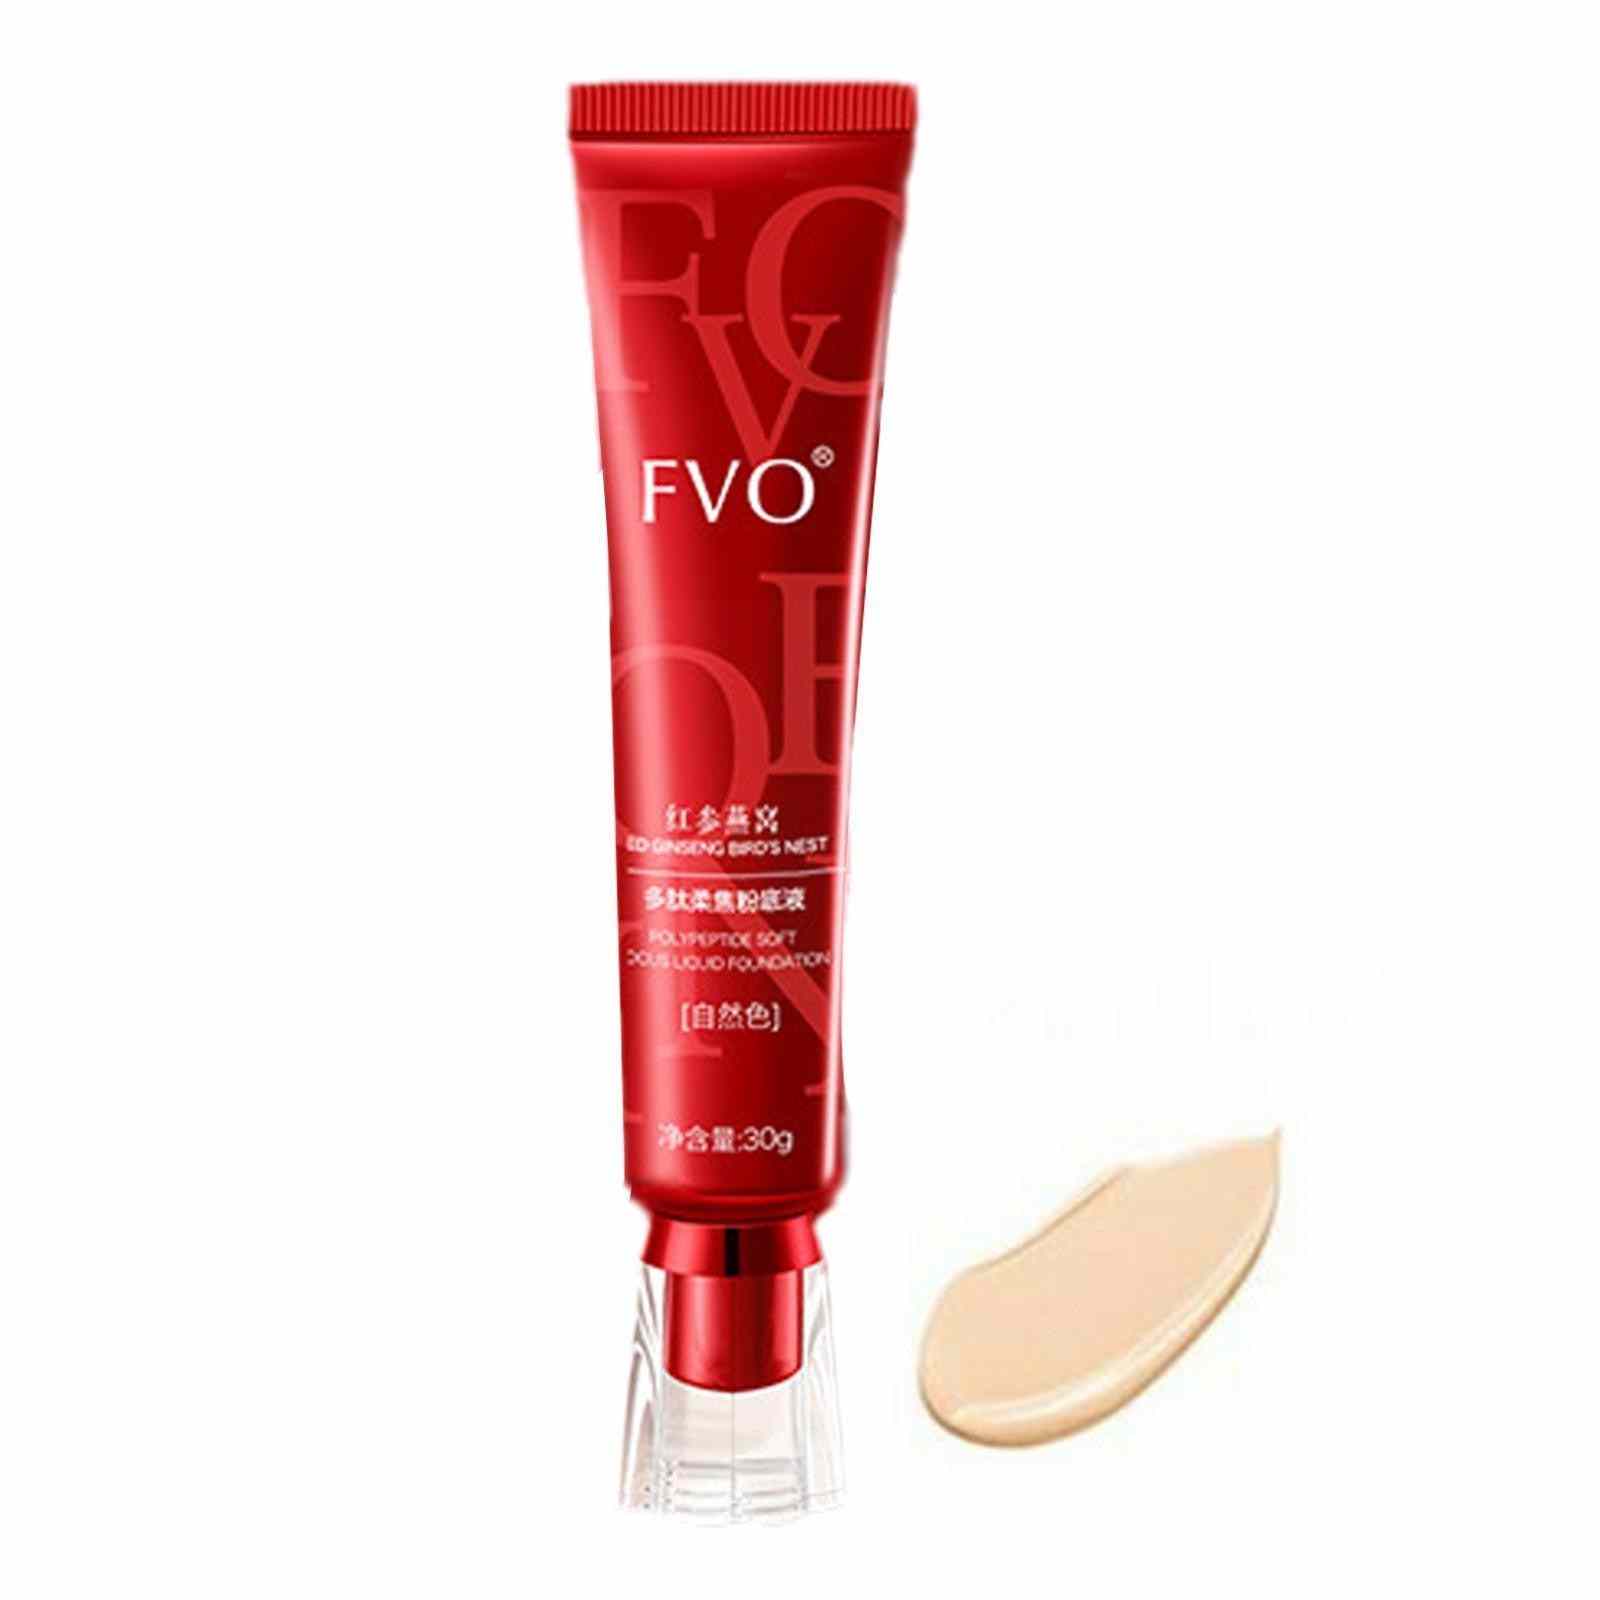 NEW FV Foundation Red Ginseng Bird's Nest Liquid Foundation Oil-control  Waterproof Hydrating Concealer Long-lasting Face Base 15